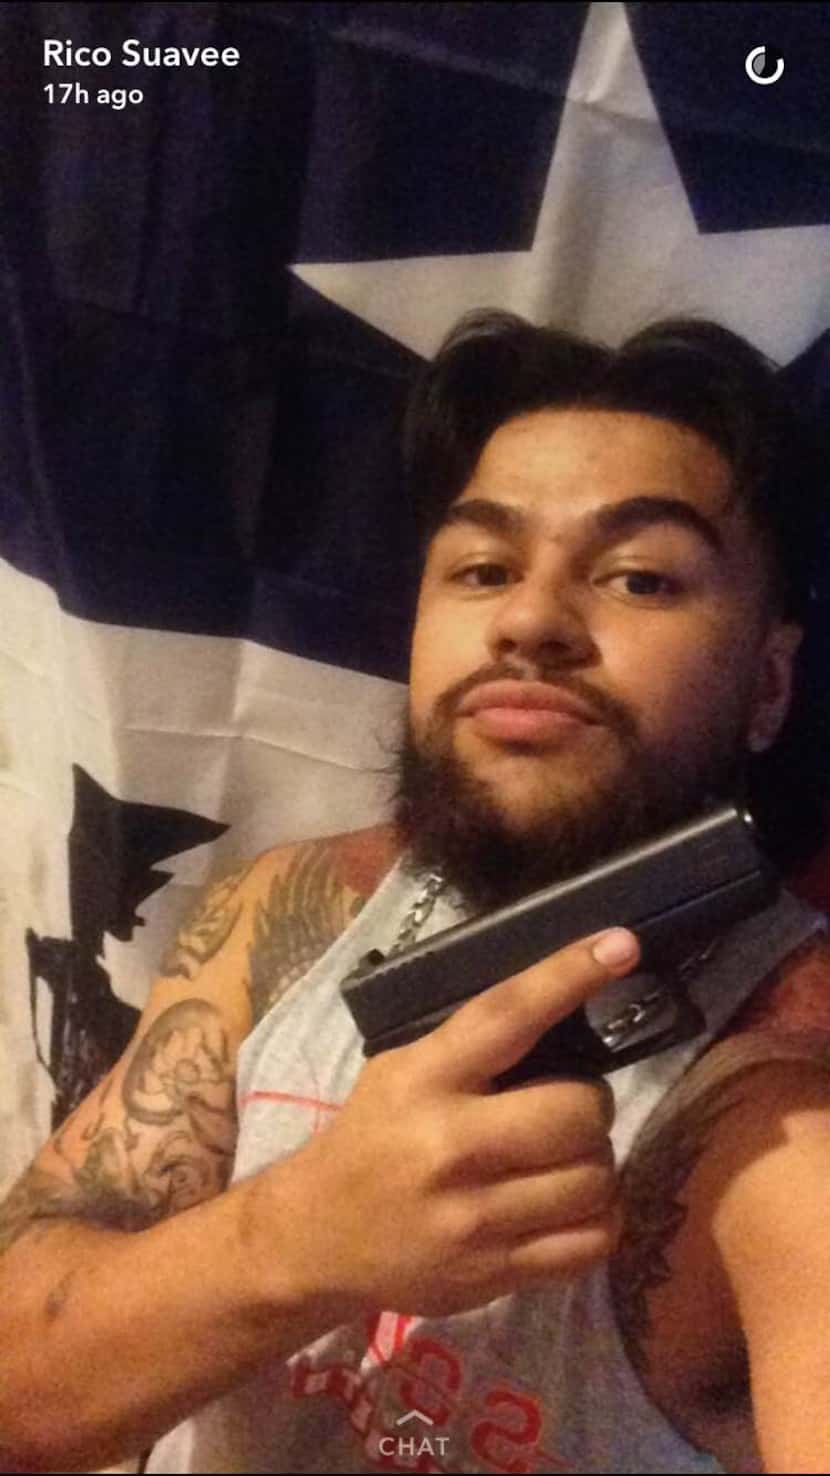 Zachary Rico posted selfies with his gun to social media